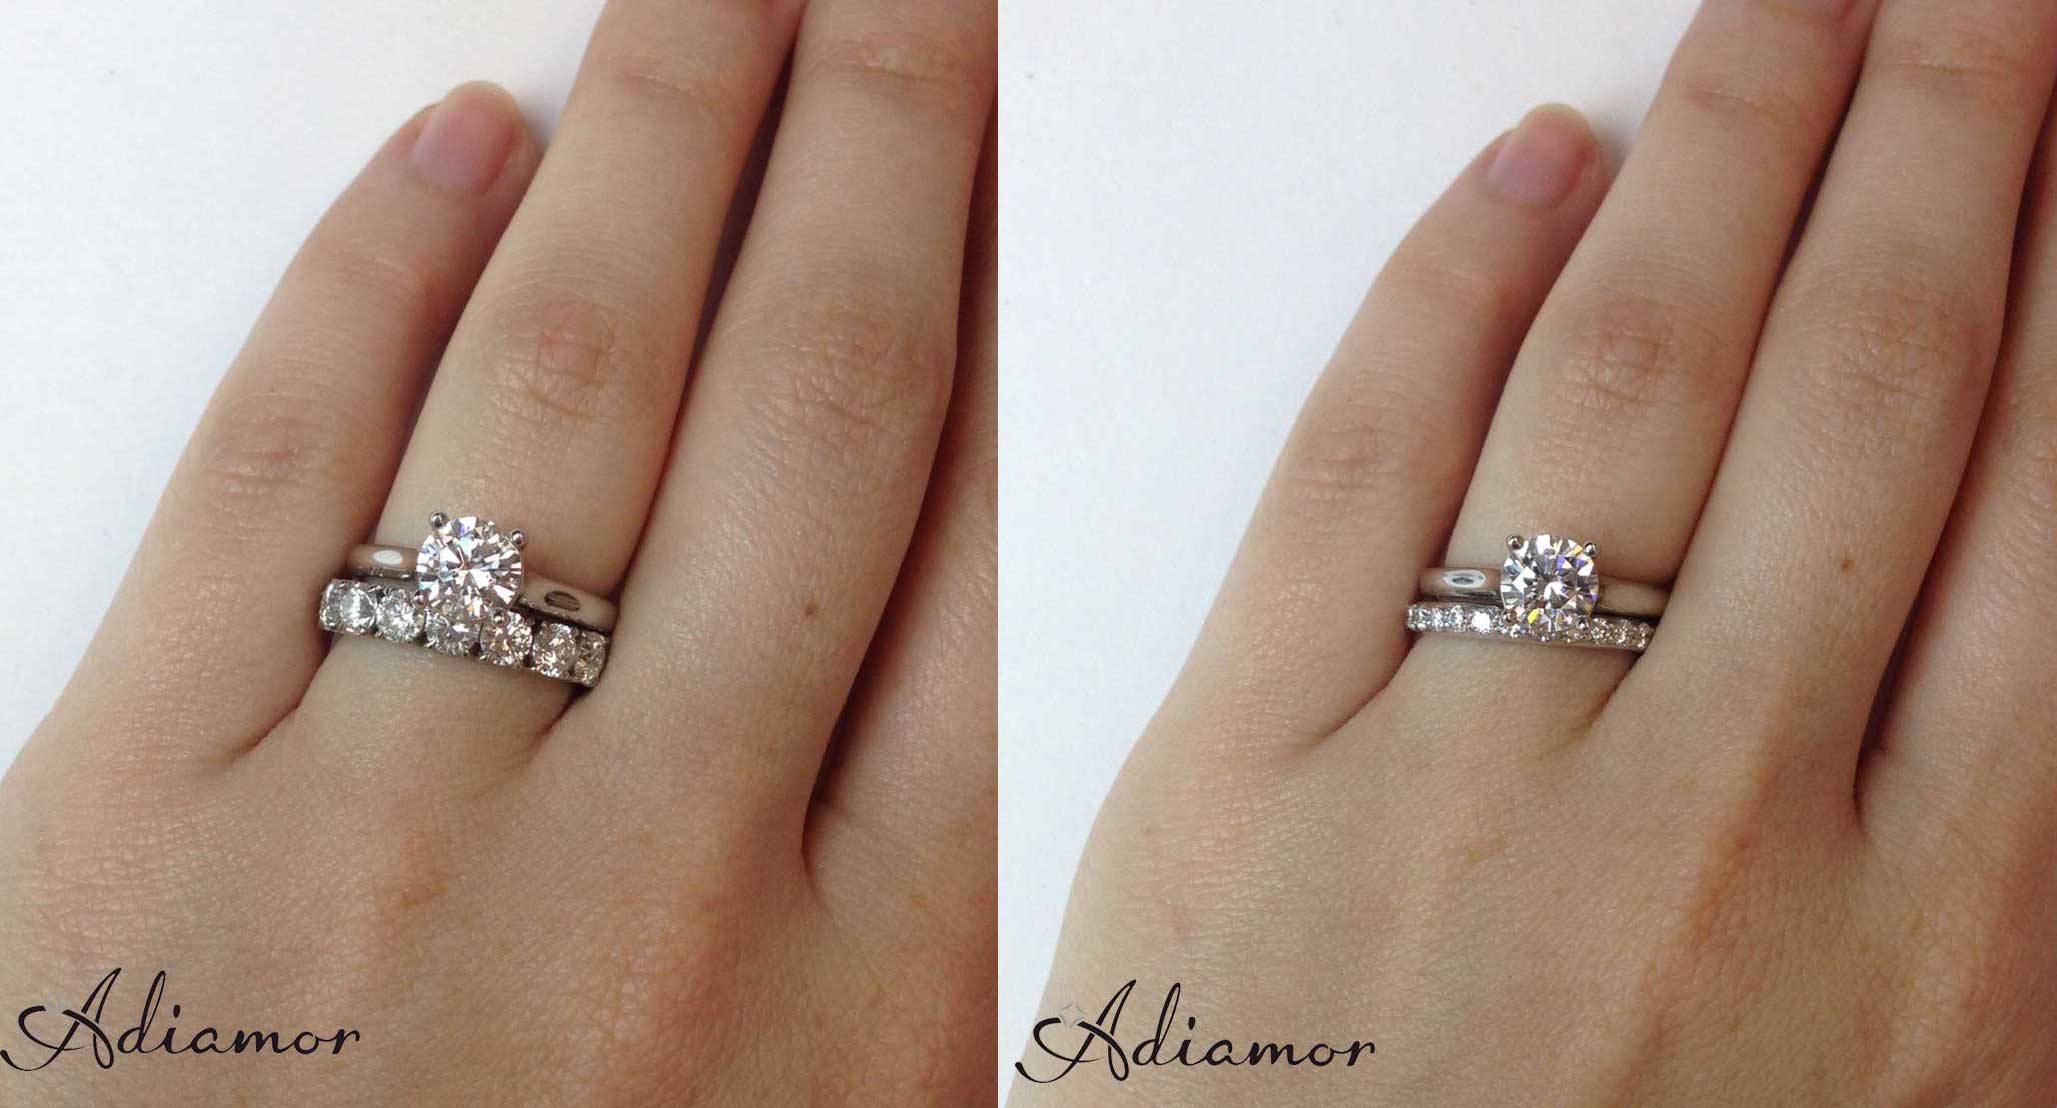 Eternity Band And Solitaire Ring On Hand 